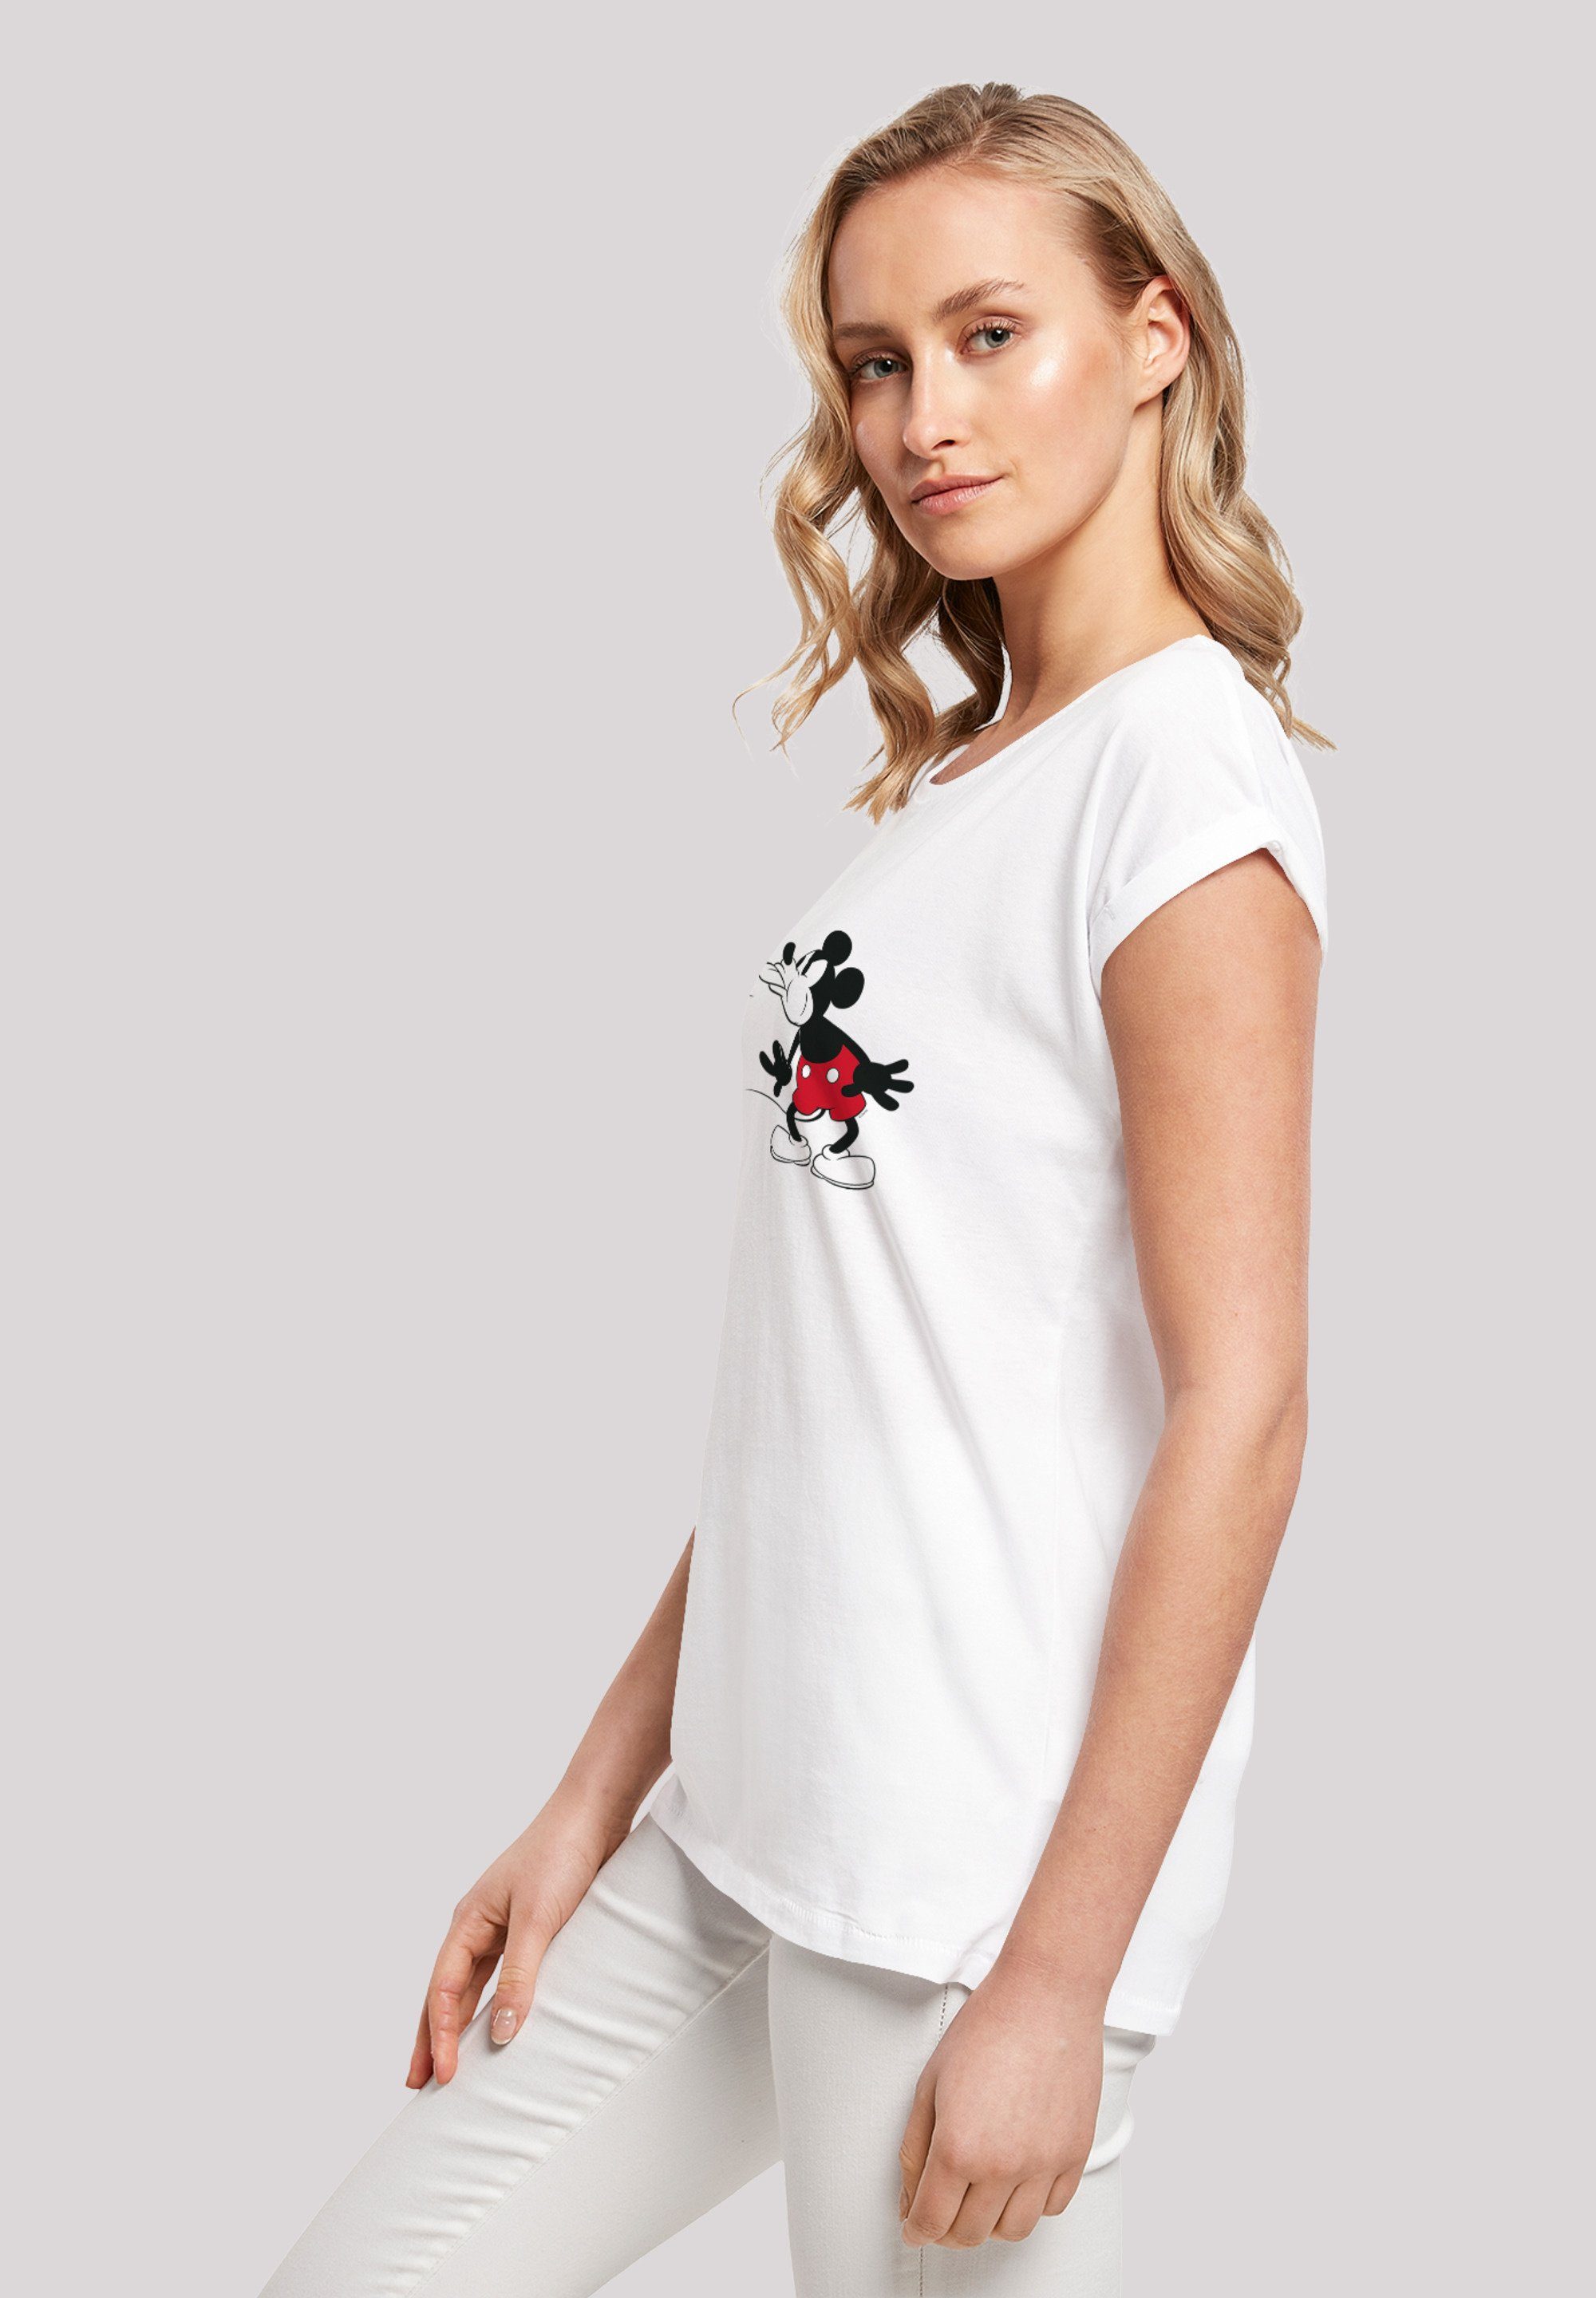 F4NT4STIC T-Shirt Disney Micky Maus Vintage Mouse Classic Mickey Print